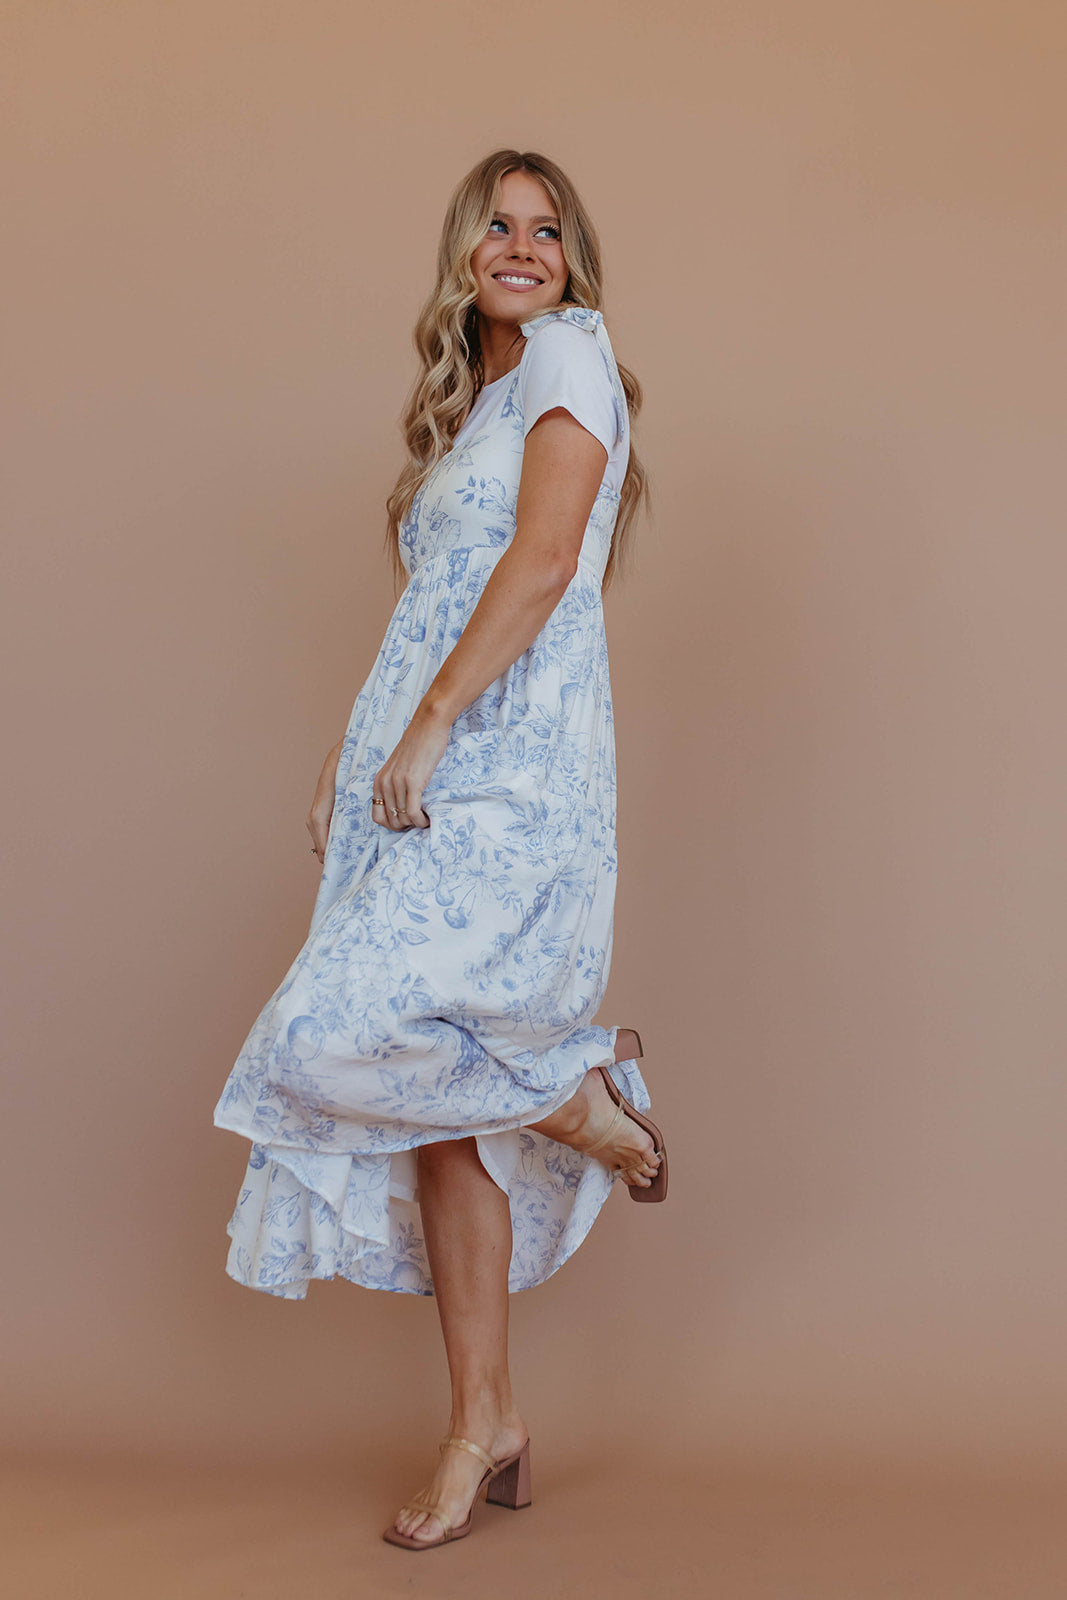 THE BLOSSOM TIERED DRESS IN BLUE FLORAL